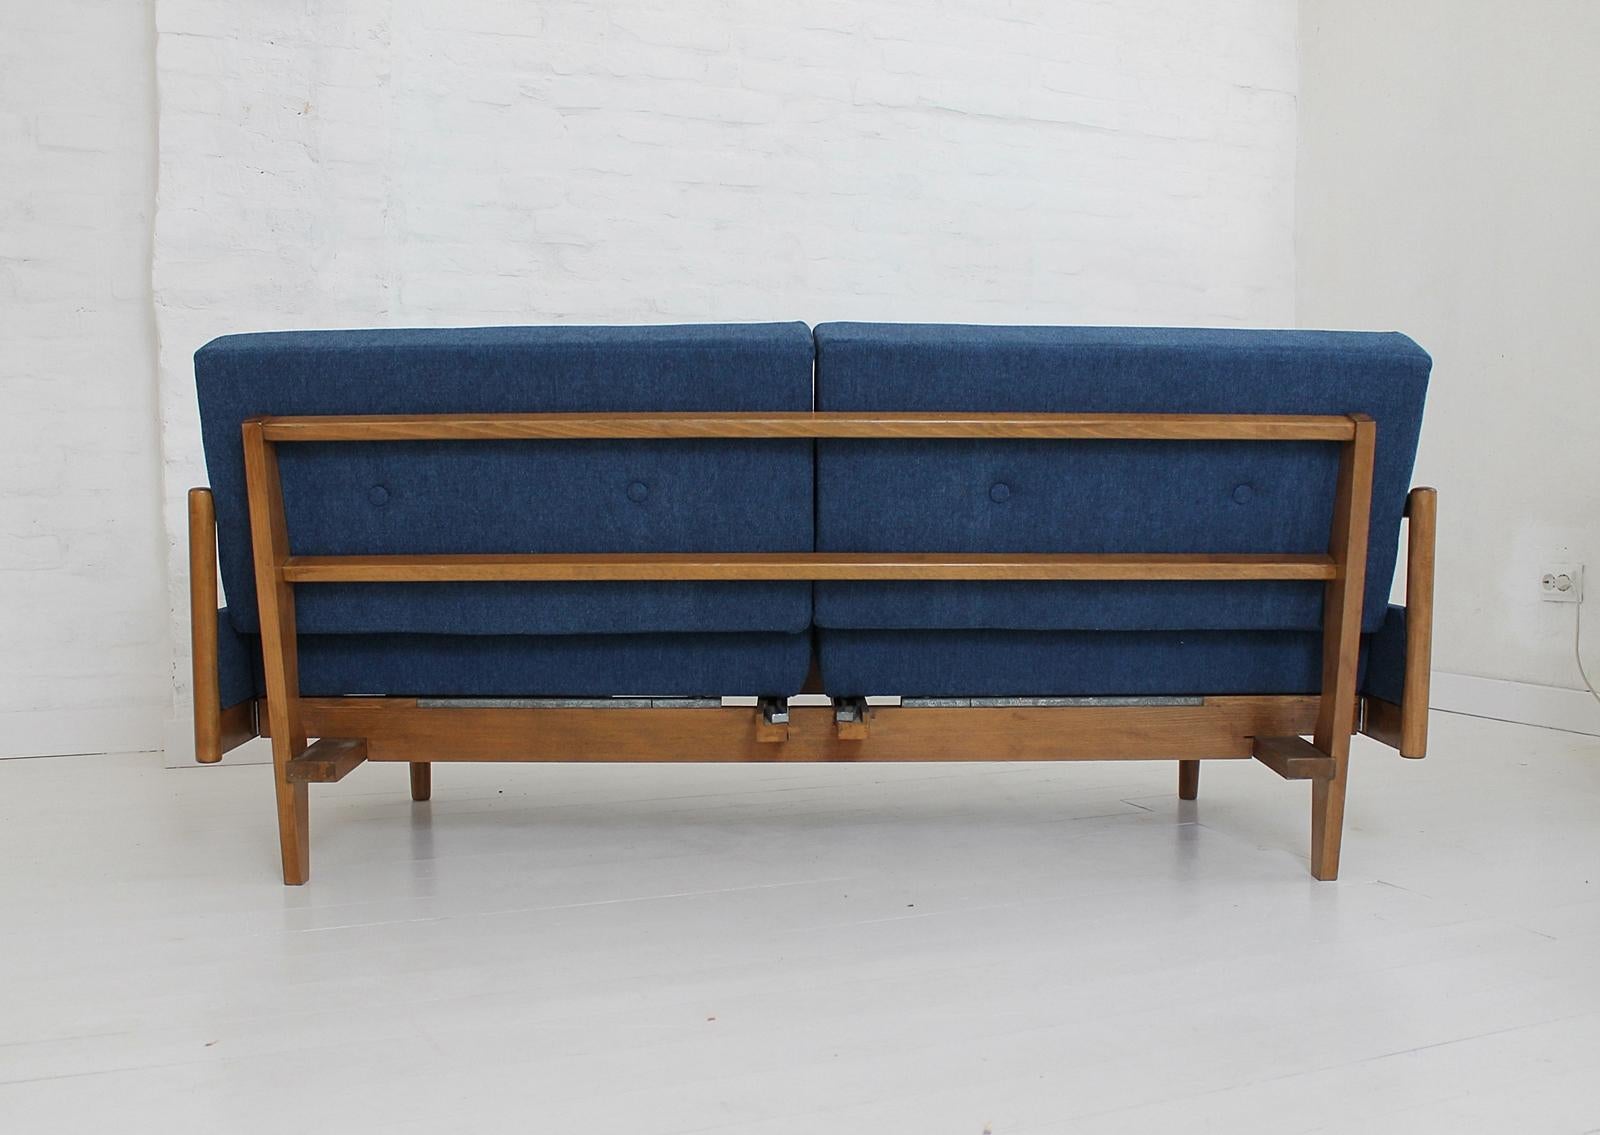 20th Century Midcentury Extendable Sofa Daybed by Wilhelm Knoll for Knoll Antimott, 1950s